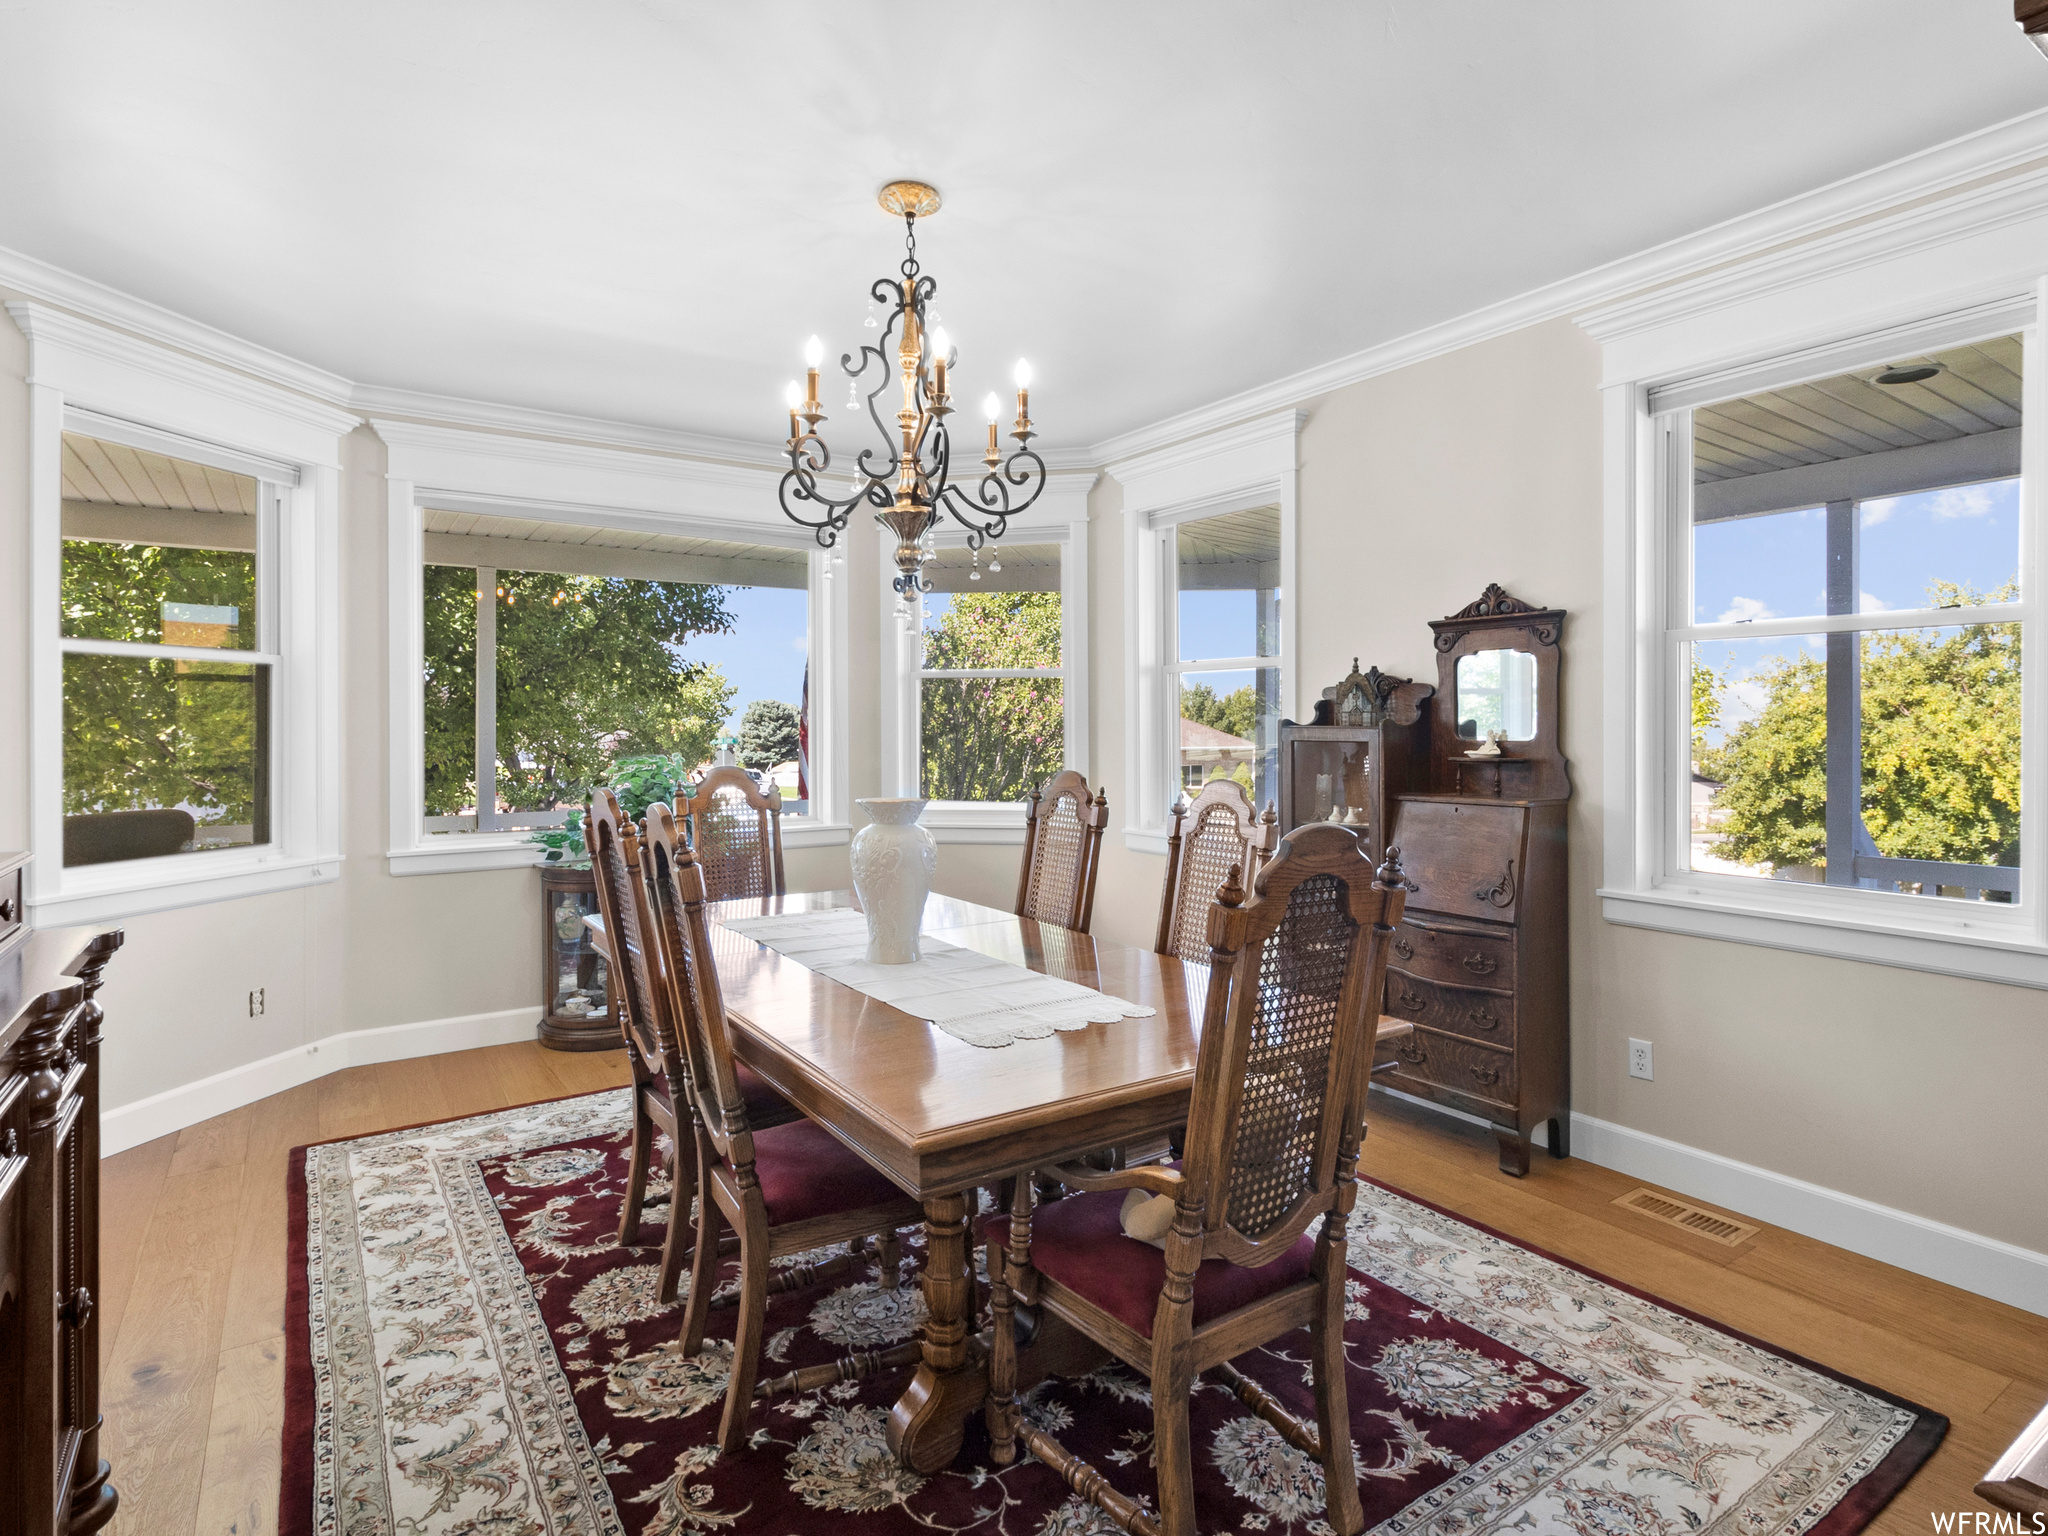 Wood floored dining area with a chandelier, ornamental molding, and a healthy amount of sunlight